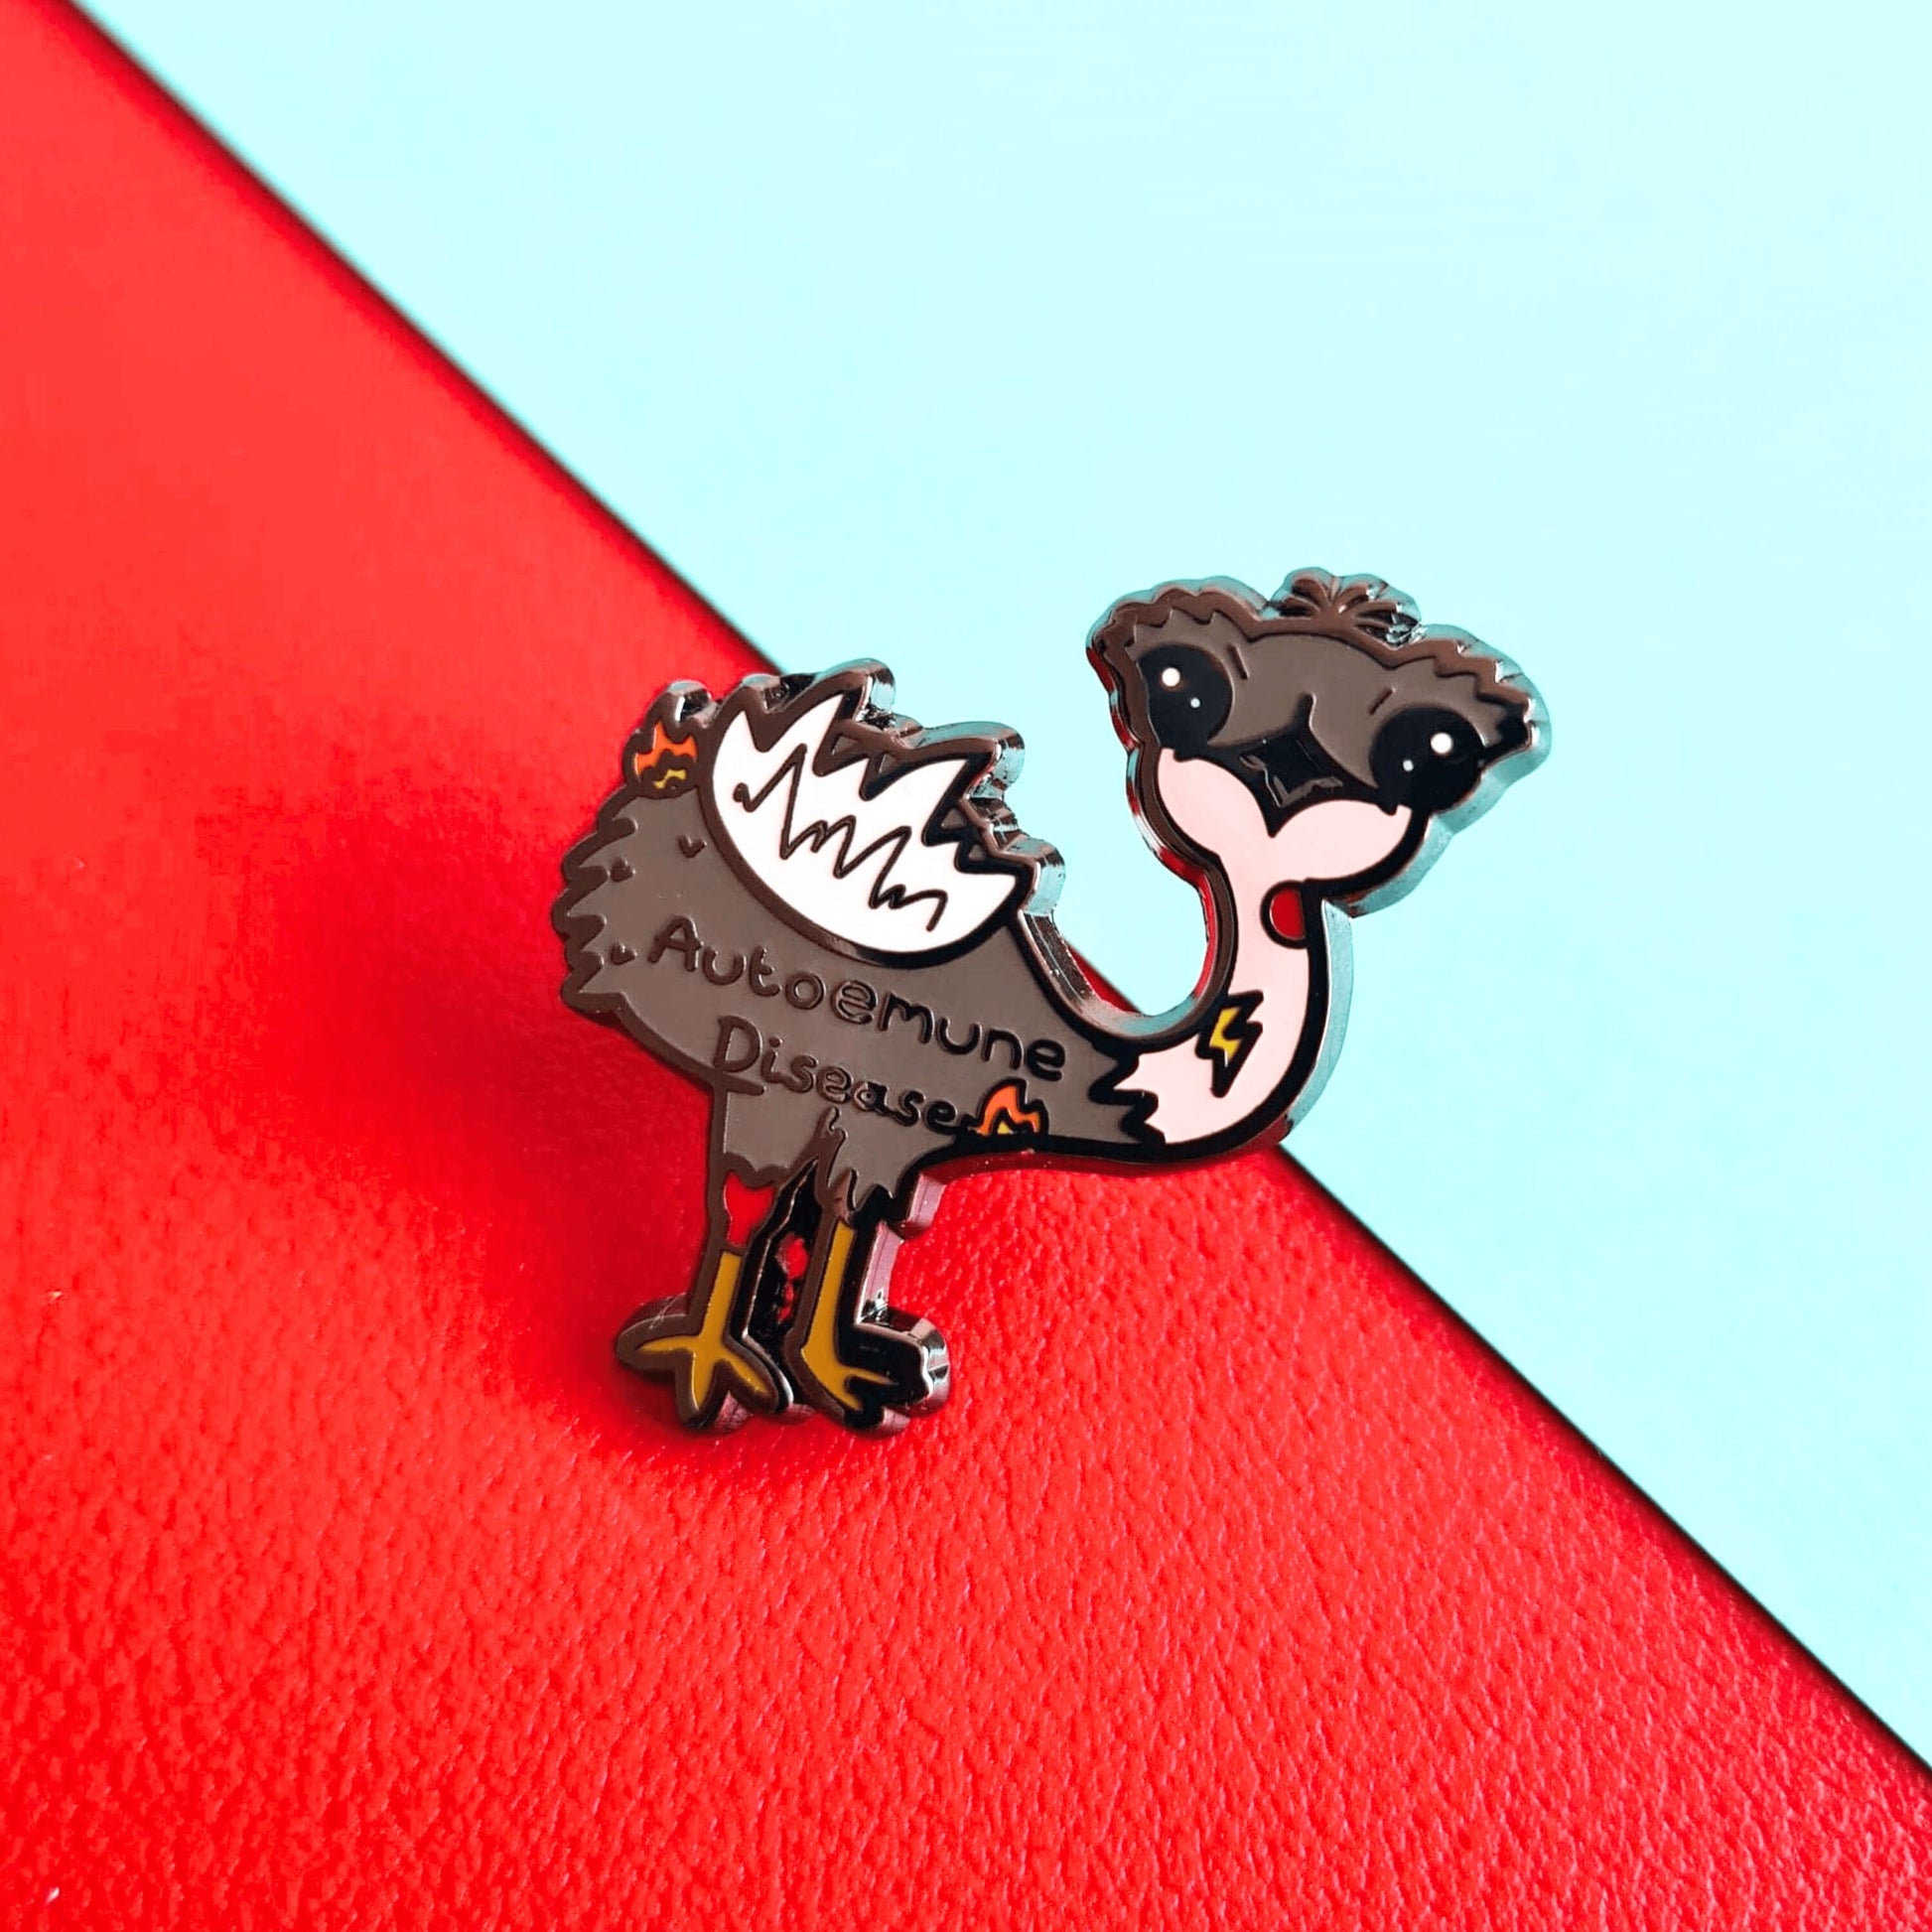 Autoemune Enamel Pin - Autoimmune Disease shown on a red and blue background. The pin is a grey and white emu bird with various problems highlighted with lightning bolts, flames and red circles with the words autoemune disease written across its belly. Design created to raise awareness for autoimmune diseases.